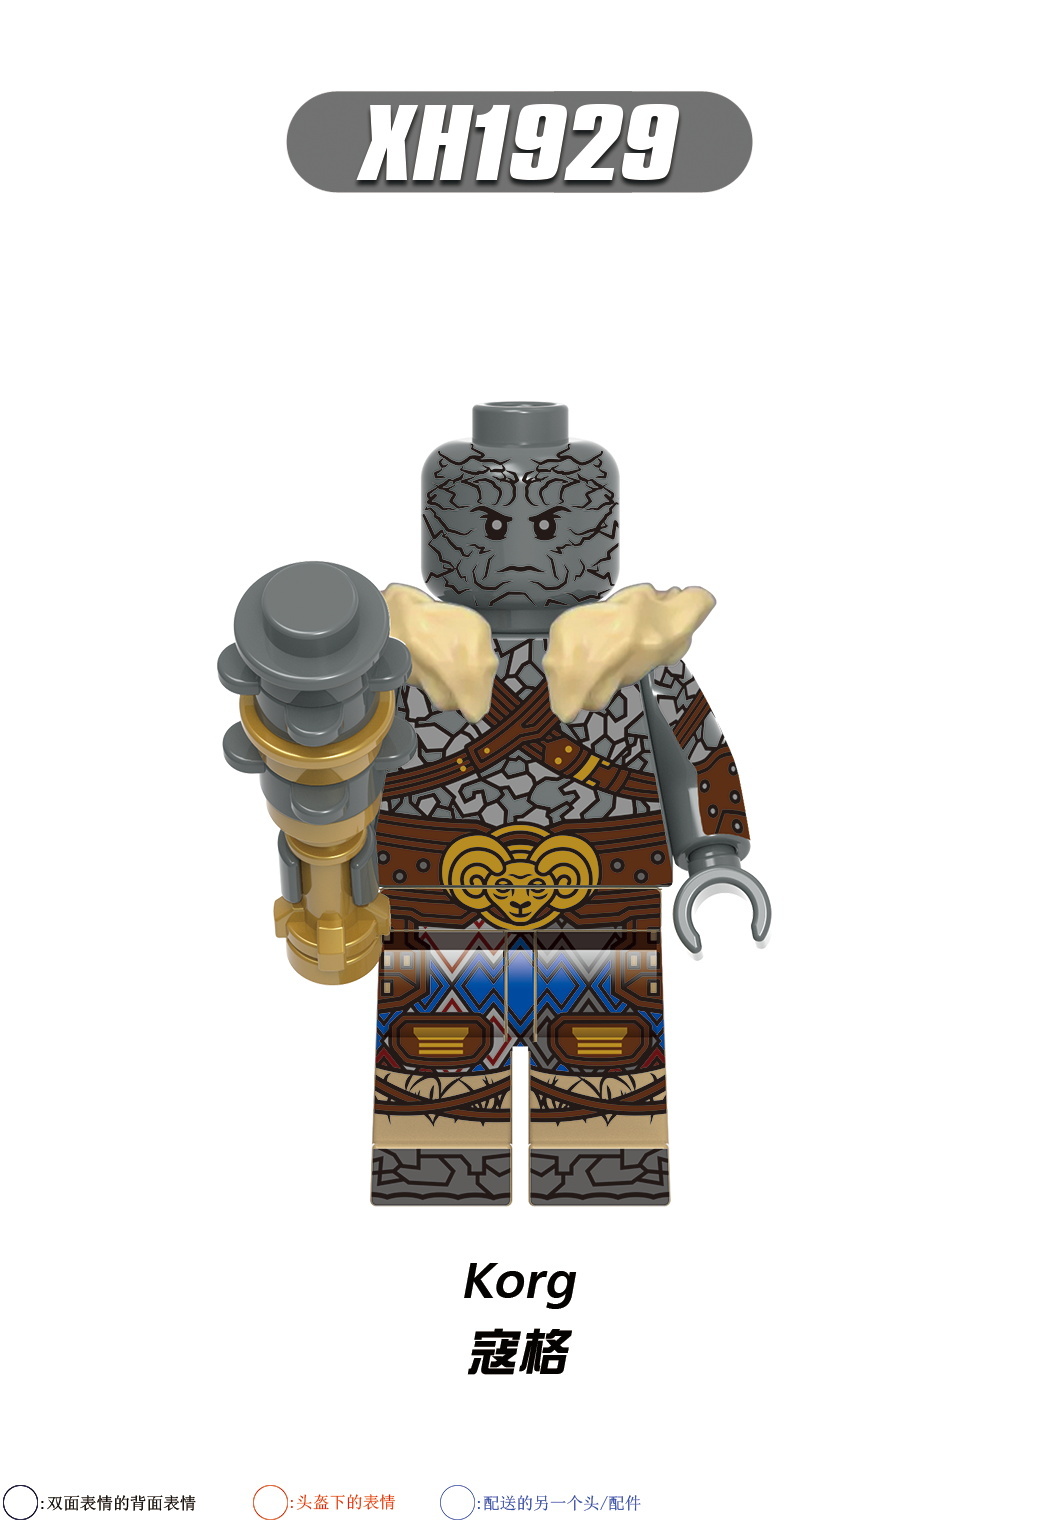 X0339 XH1923 XH1924 XH1925 XH1926 XH1927 XH1928 XH1929 XH1930 Super Hero Movie Series Building Blocks Thor Korg Mighty Thor Gorr Star-Lord Valkyrie Ravager Thor Action Figures Educational Toys For Kids Gifts